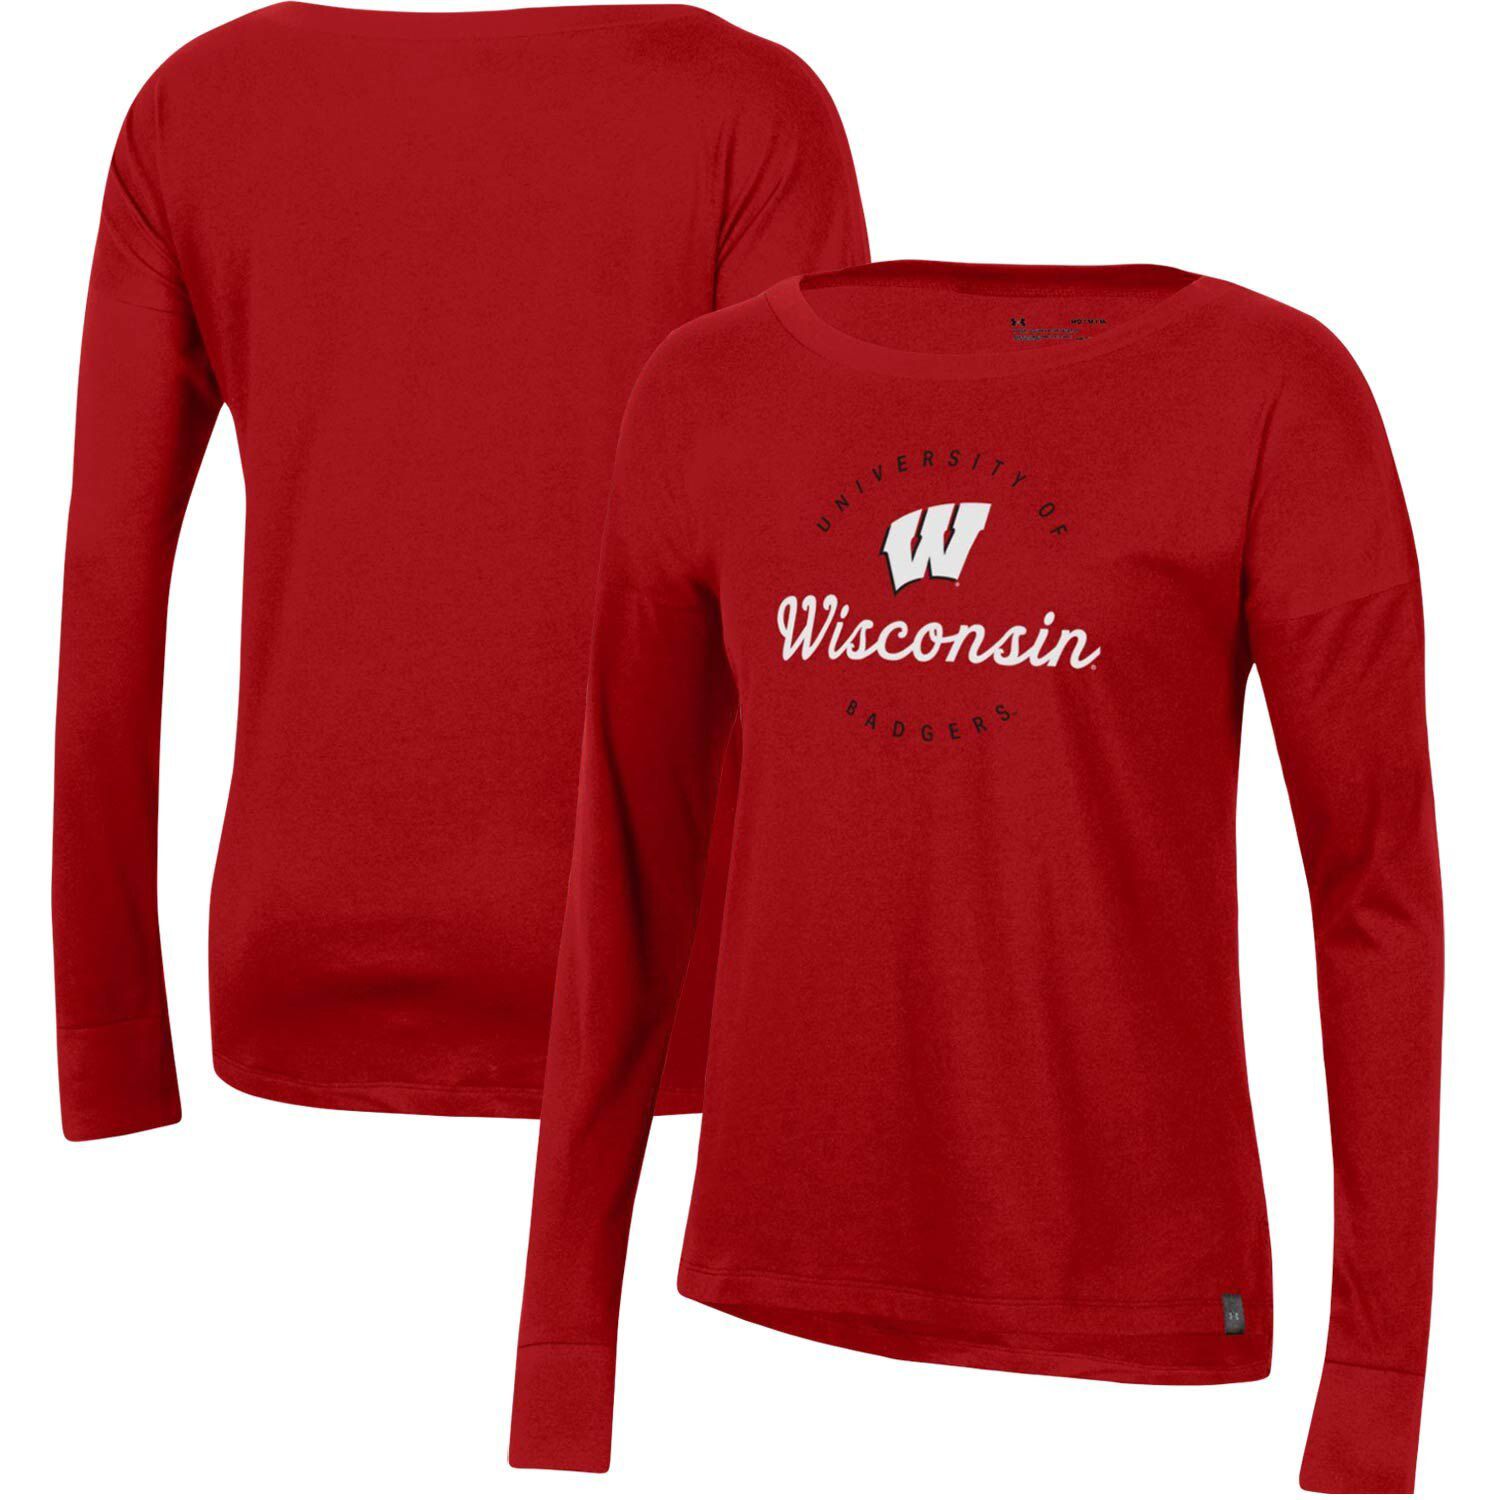 under armour red long sleeve